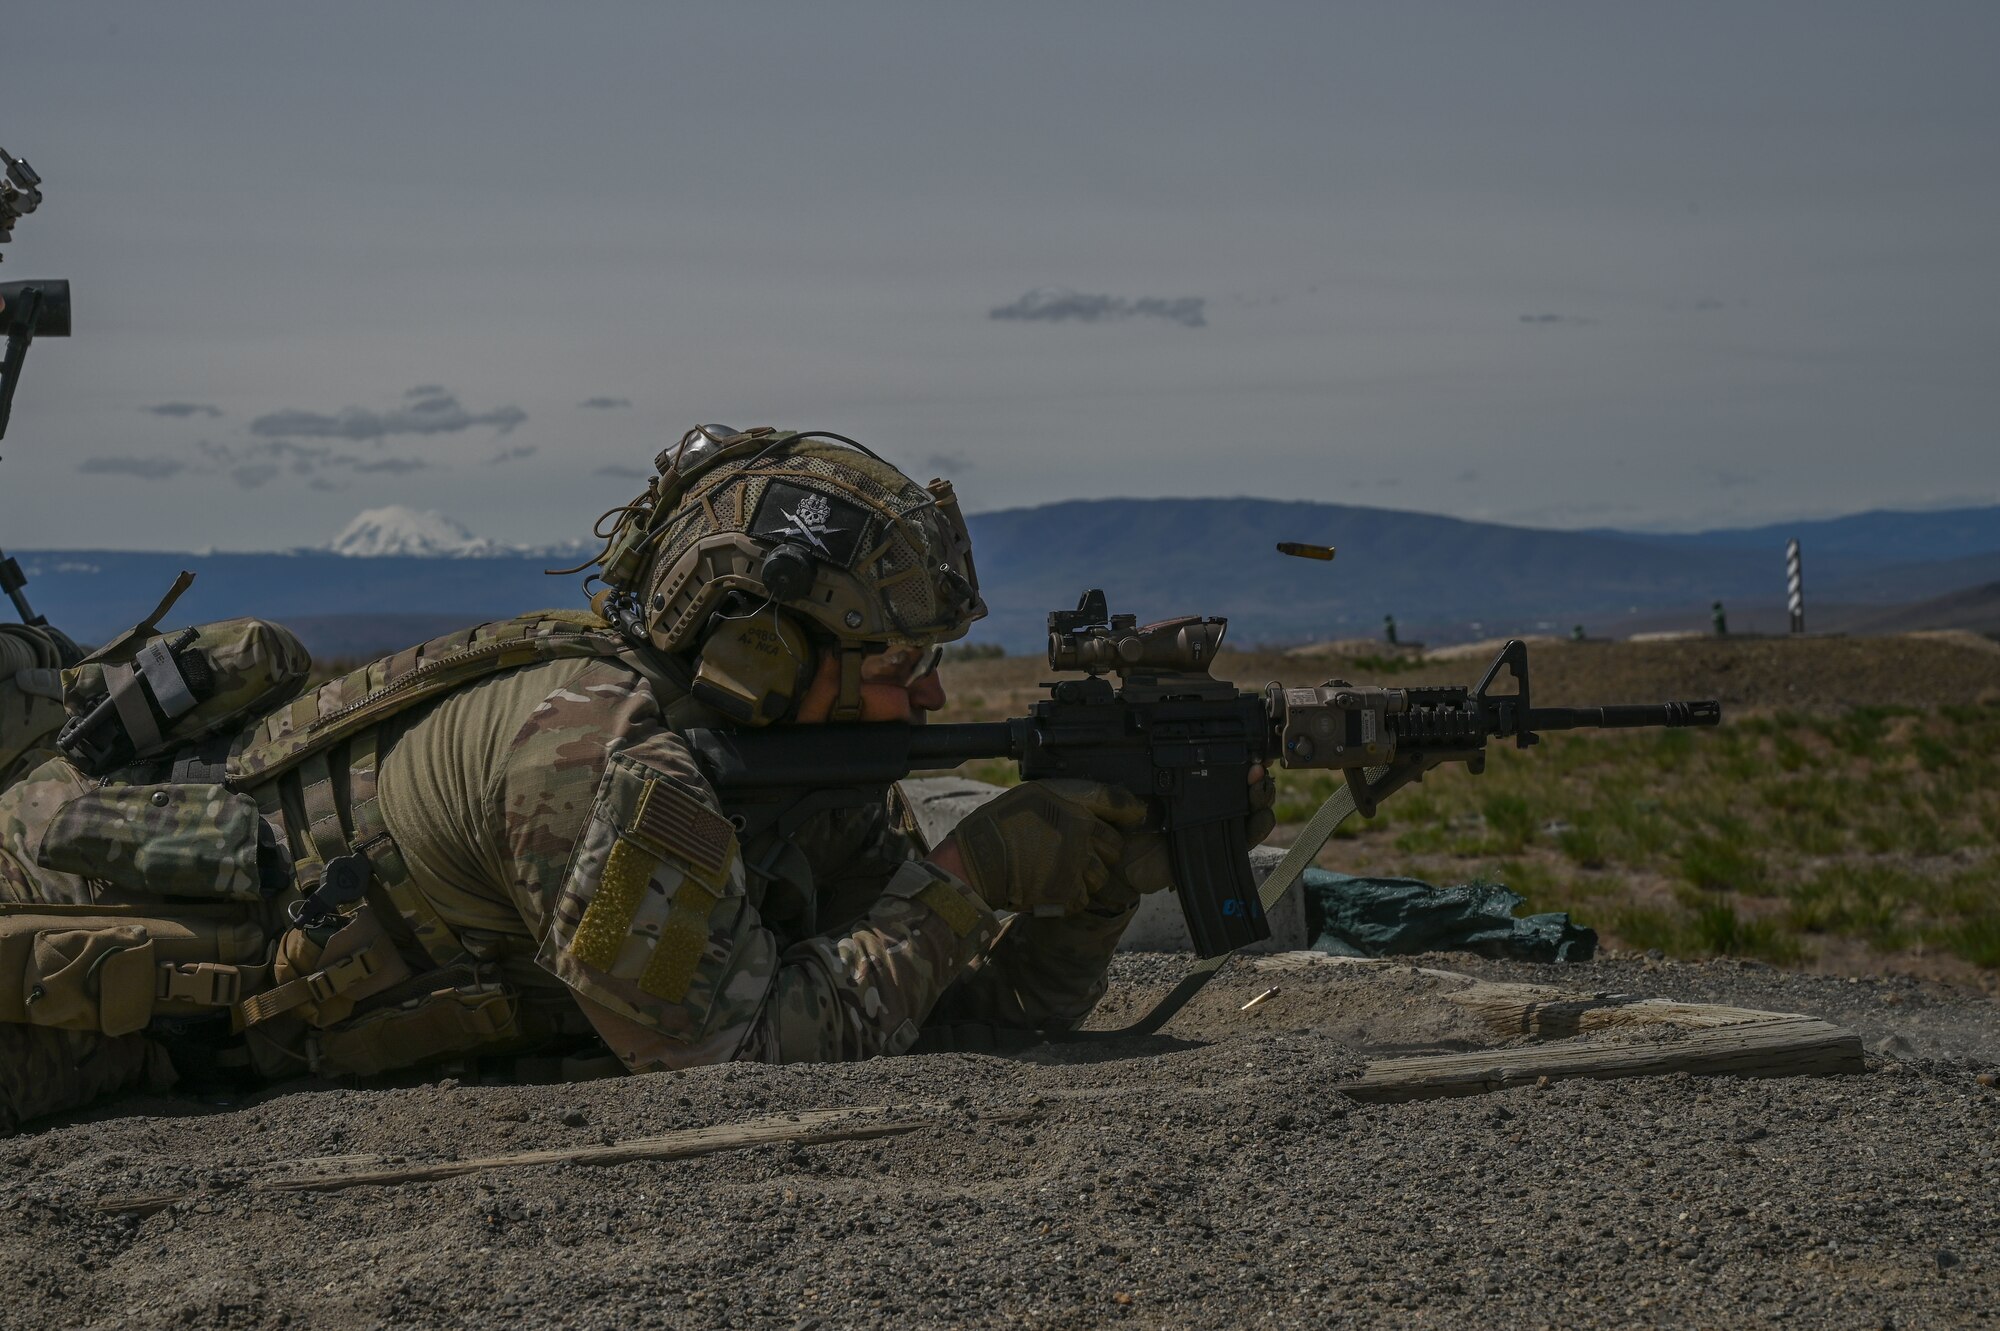 A U.S. Air Force 5th Air Support Operations Squadron tactical air control party Airman fires an M4 weapon system at Yakima Training Center, Washington, April 27, 2021. The 5th ASOS held a week-long field training exercise to become more proficient in infiltration and exfiltration, small arms marksmanship, heavy weapons utilization, small unit tactics, and force on force full mission profiles in order to meet changing tactical requirements and advance ground skill sets to meet varying mission requirements. (U.S. Air Force photo by Airman 1st Class Callie Norton)